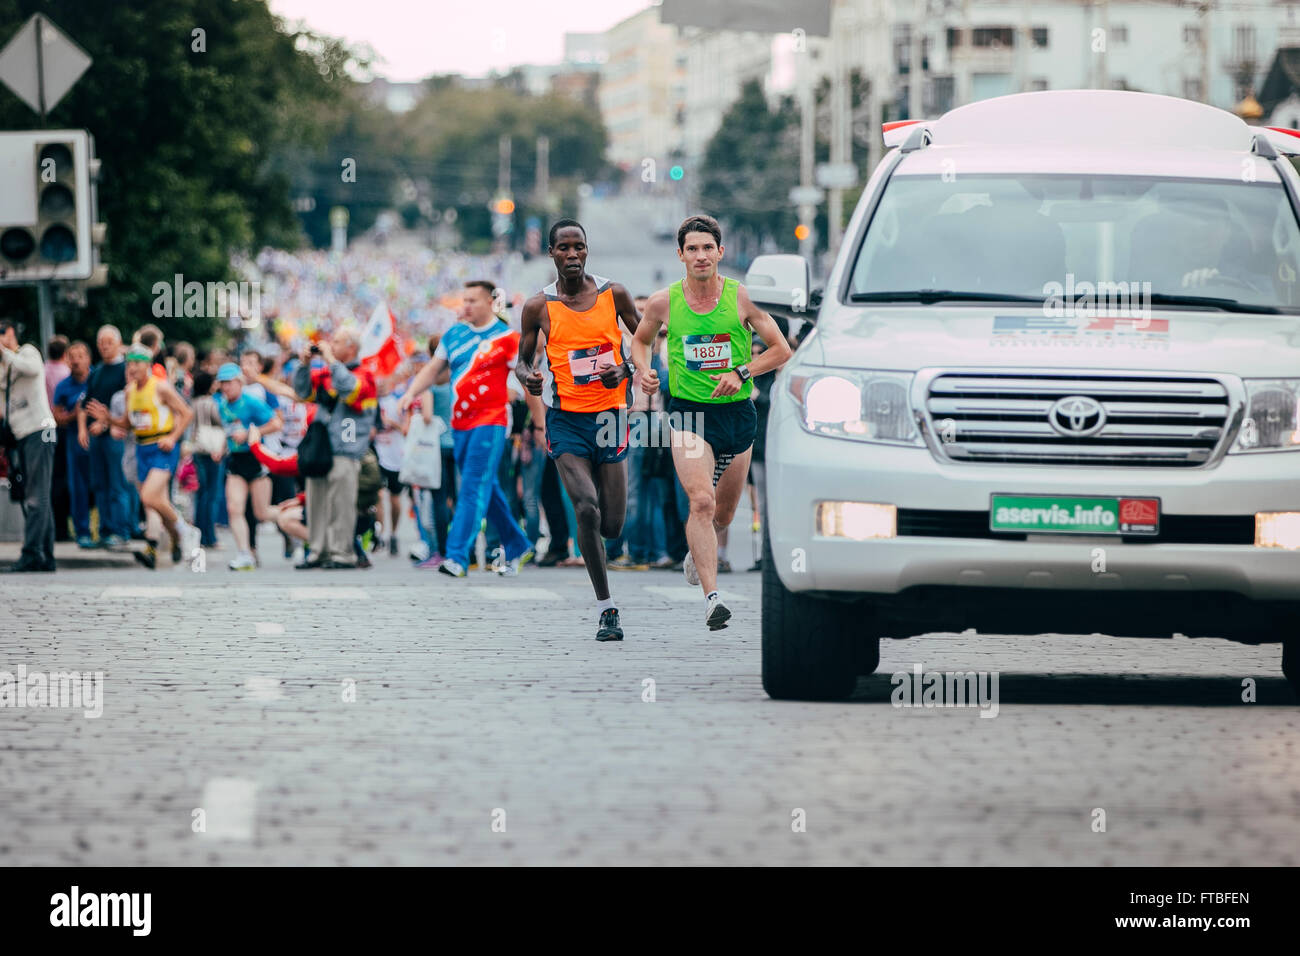 two athlete runner leaders of race run behind safety car during Marathon Europe-Asia Stock Photo